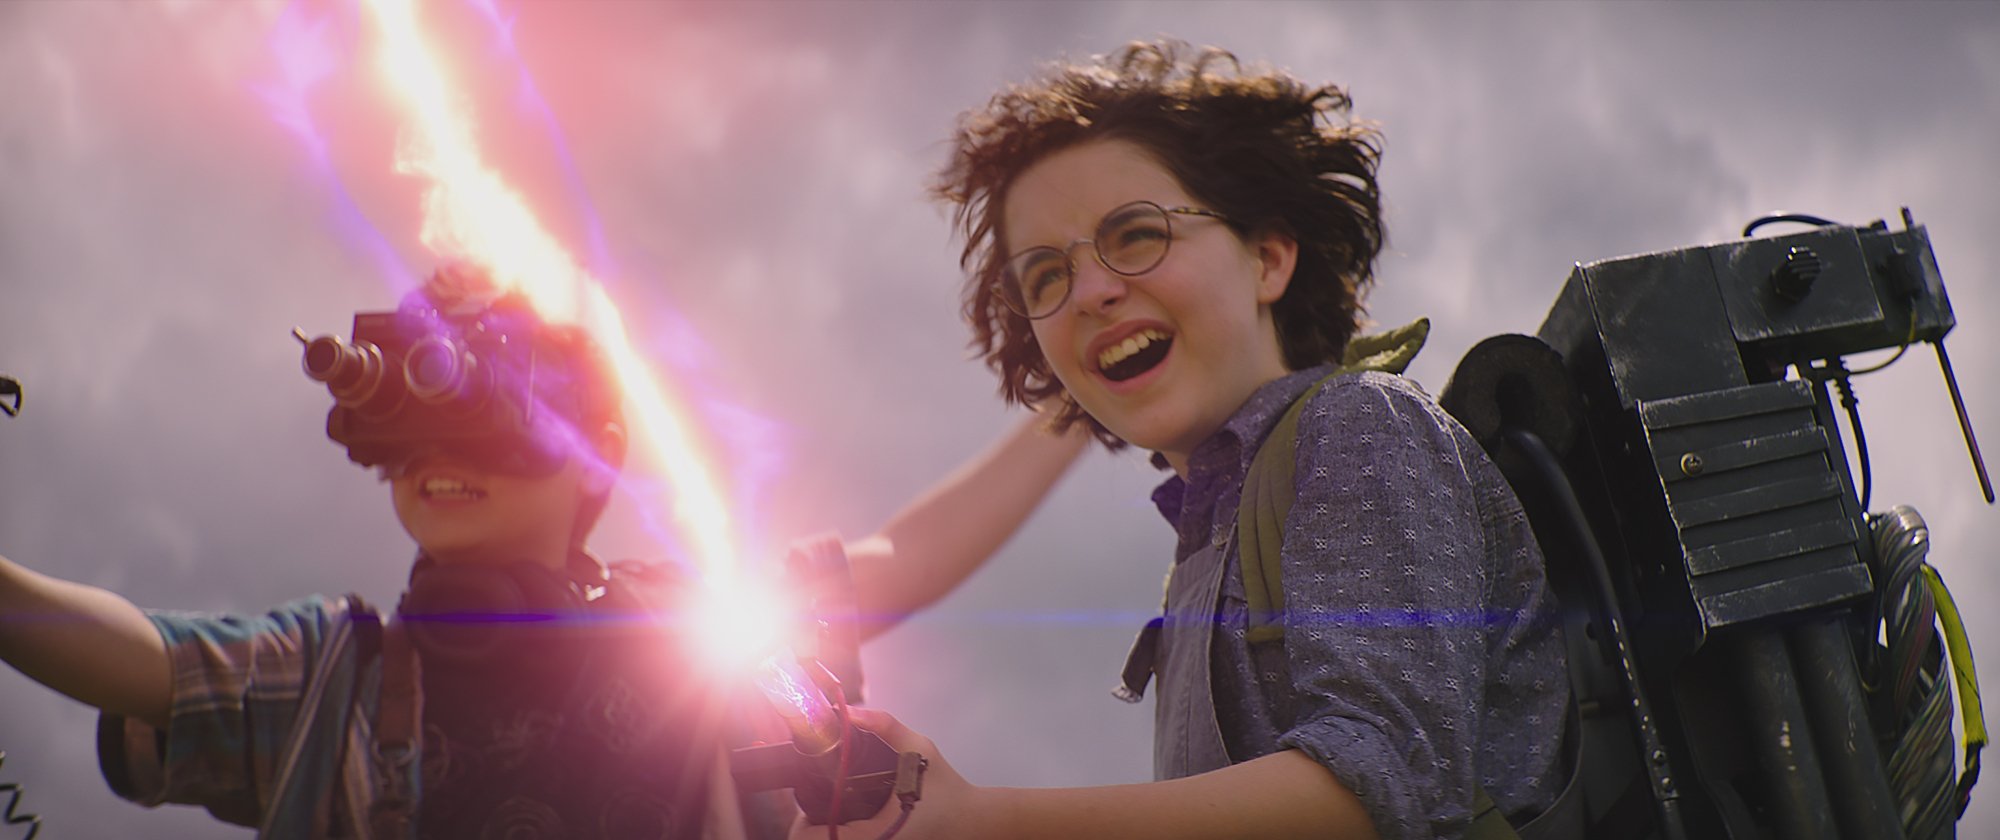 'Ghostbusters: Afterlife' with Phoebe (Mckenna Grace) and Podcast (Logan Kim) firing a proton pack with goggles